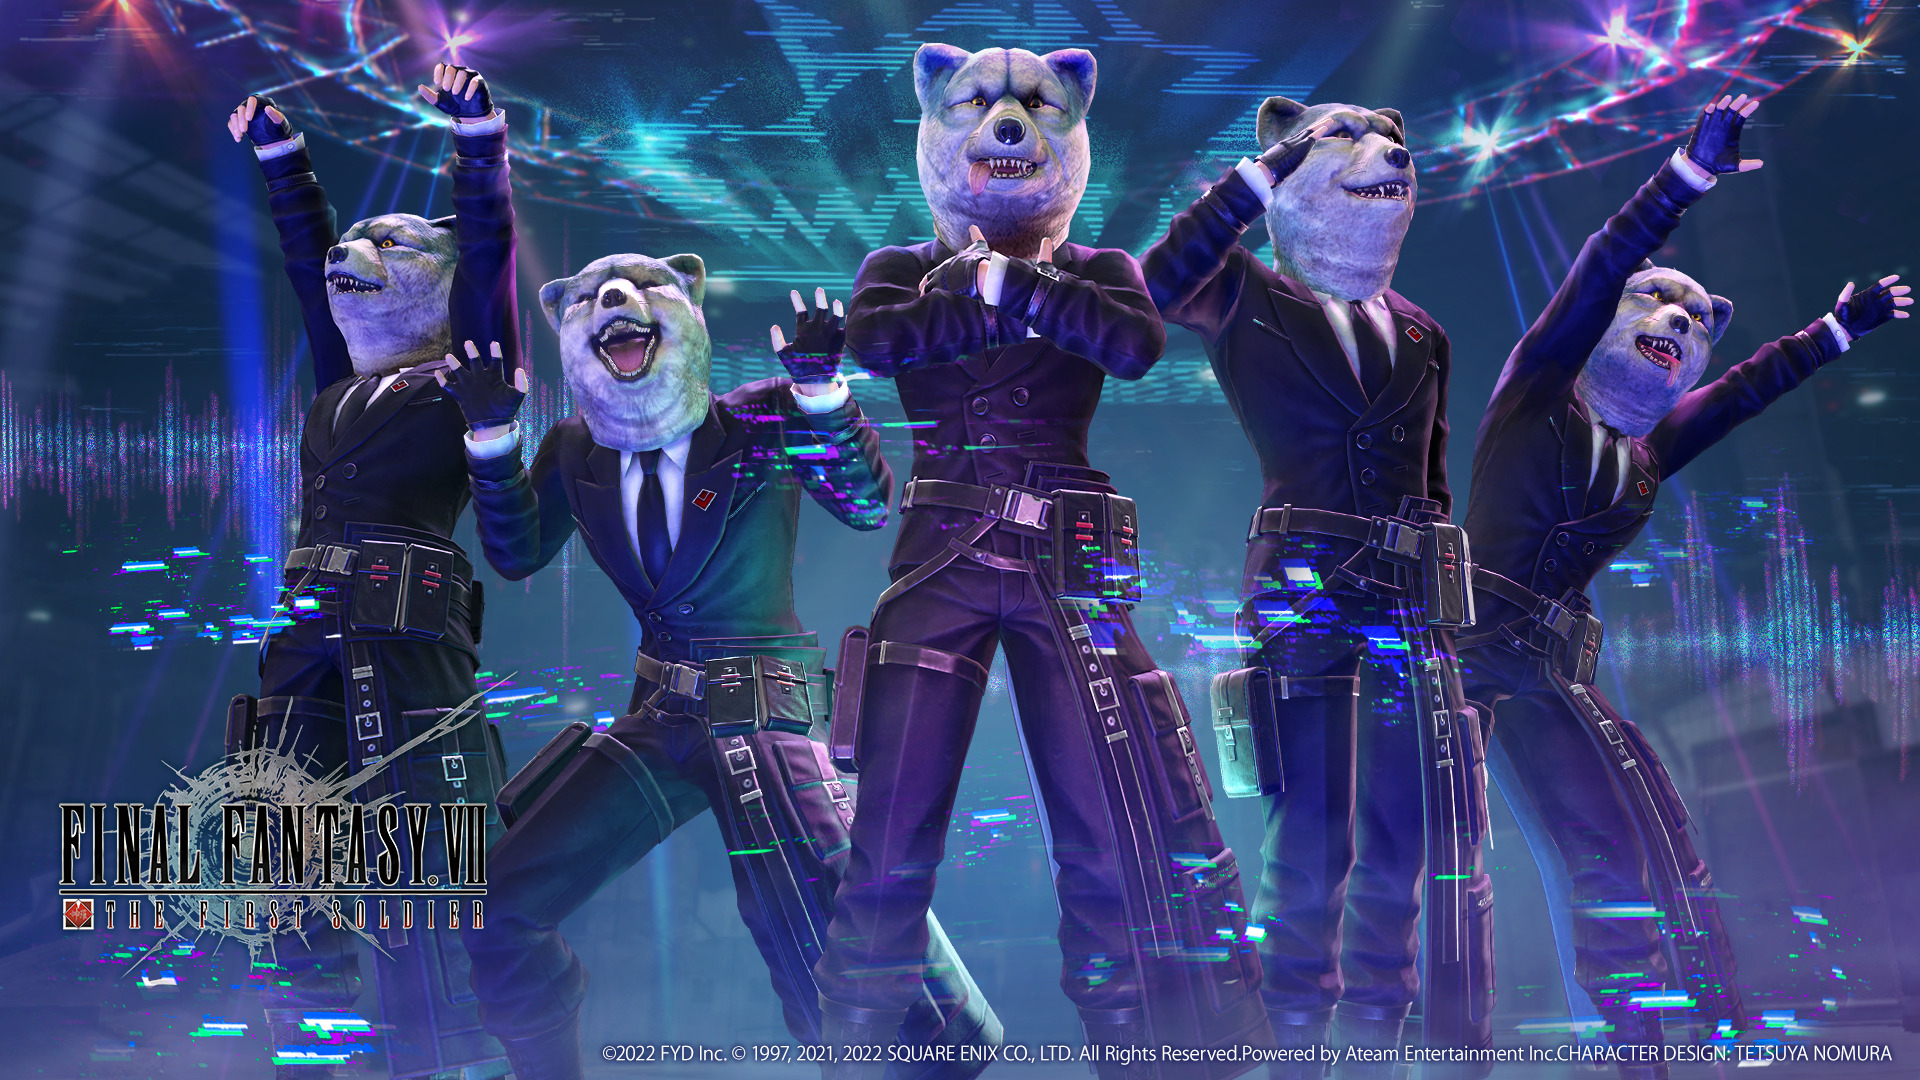 Popular Rock Band MAN WITH A MISSION Comes to FINAL FANTASY VII